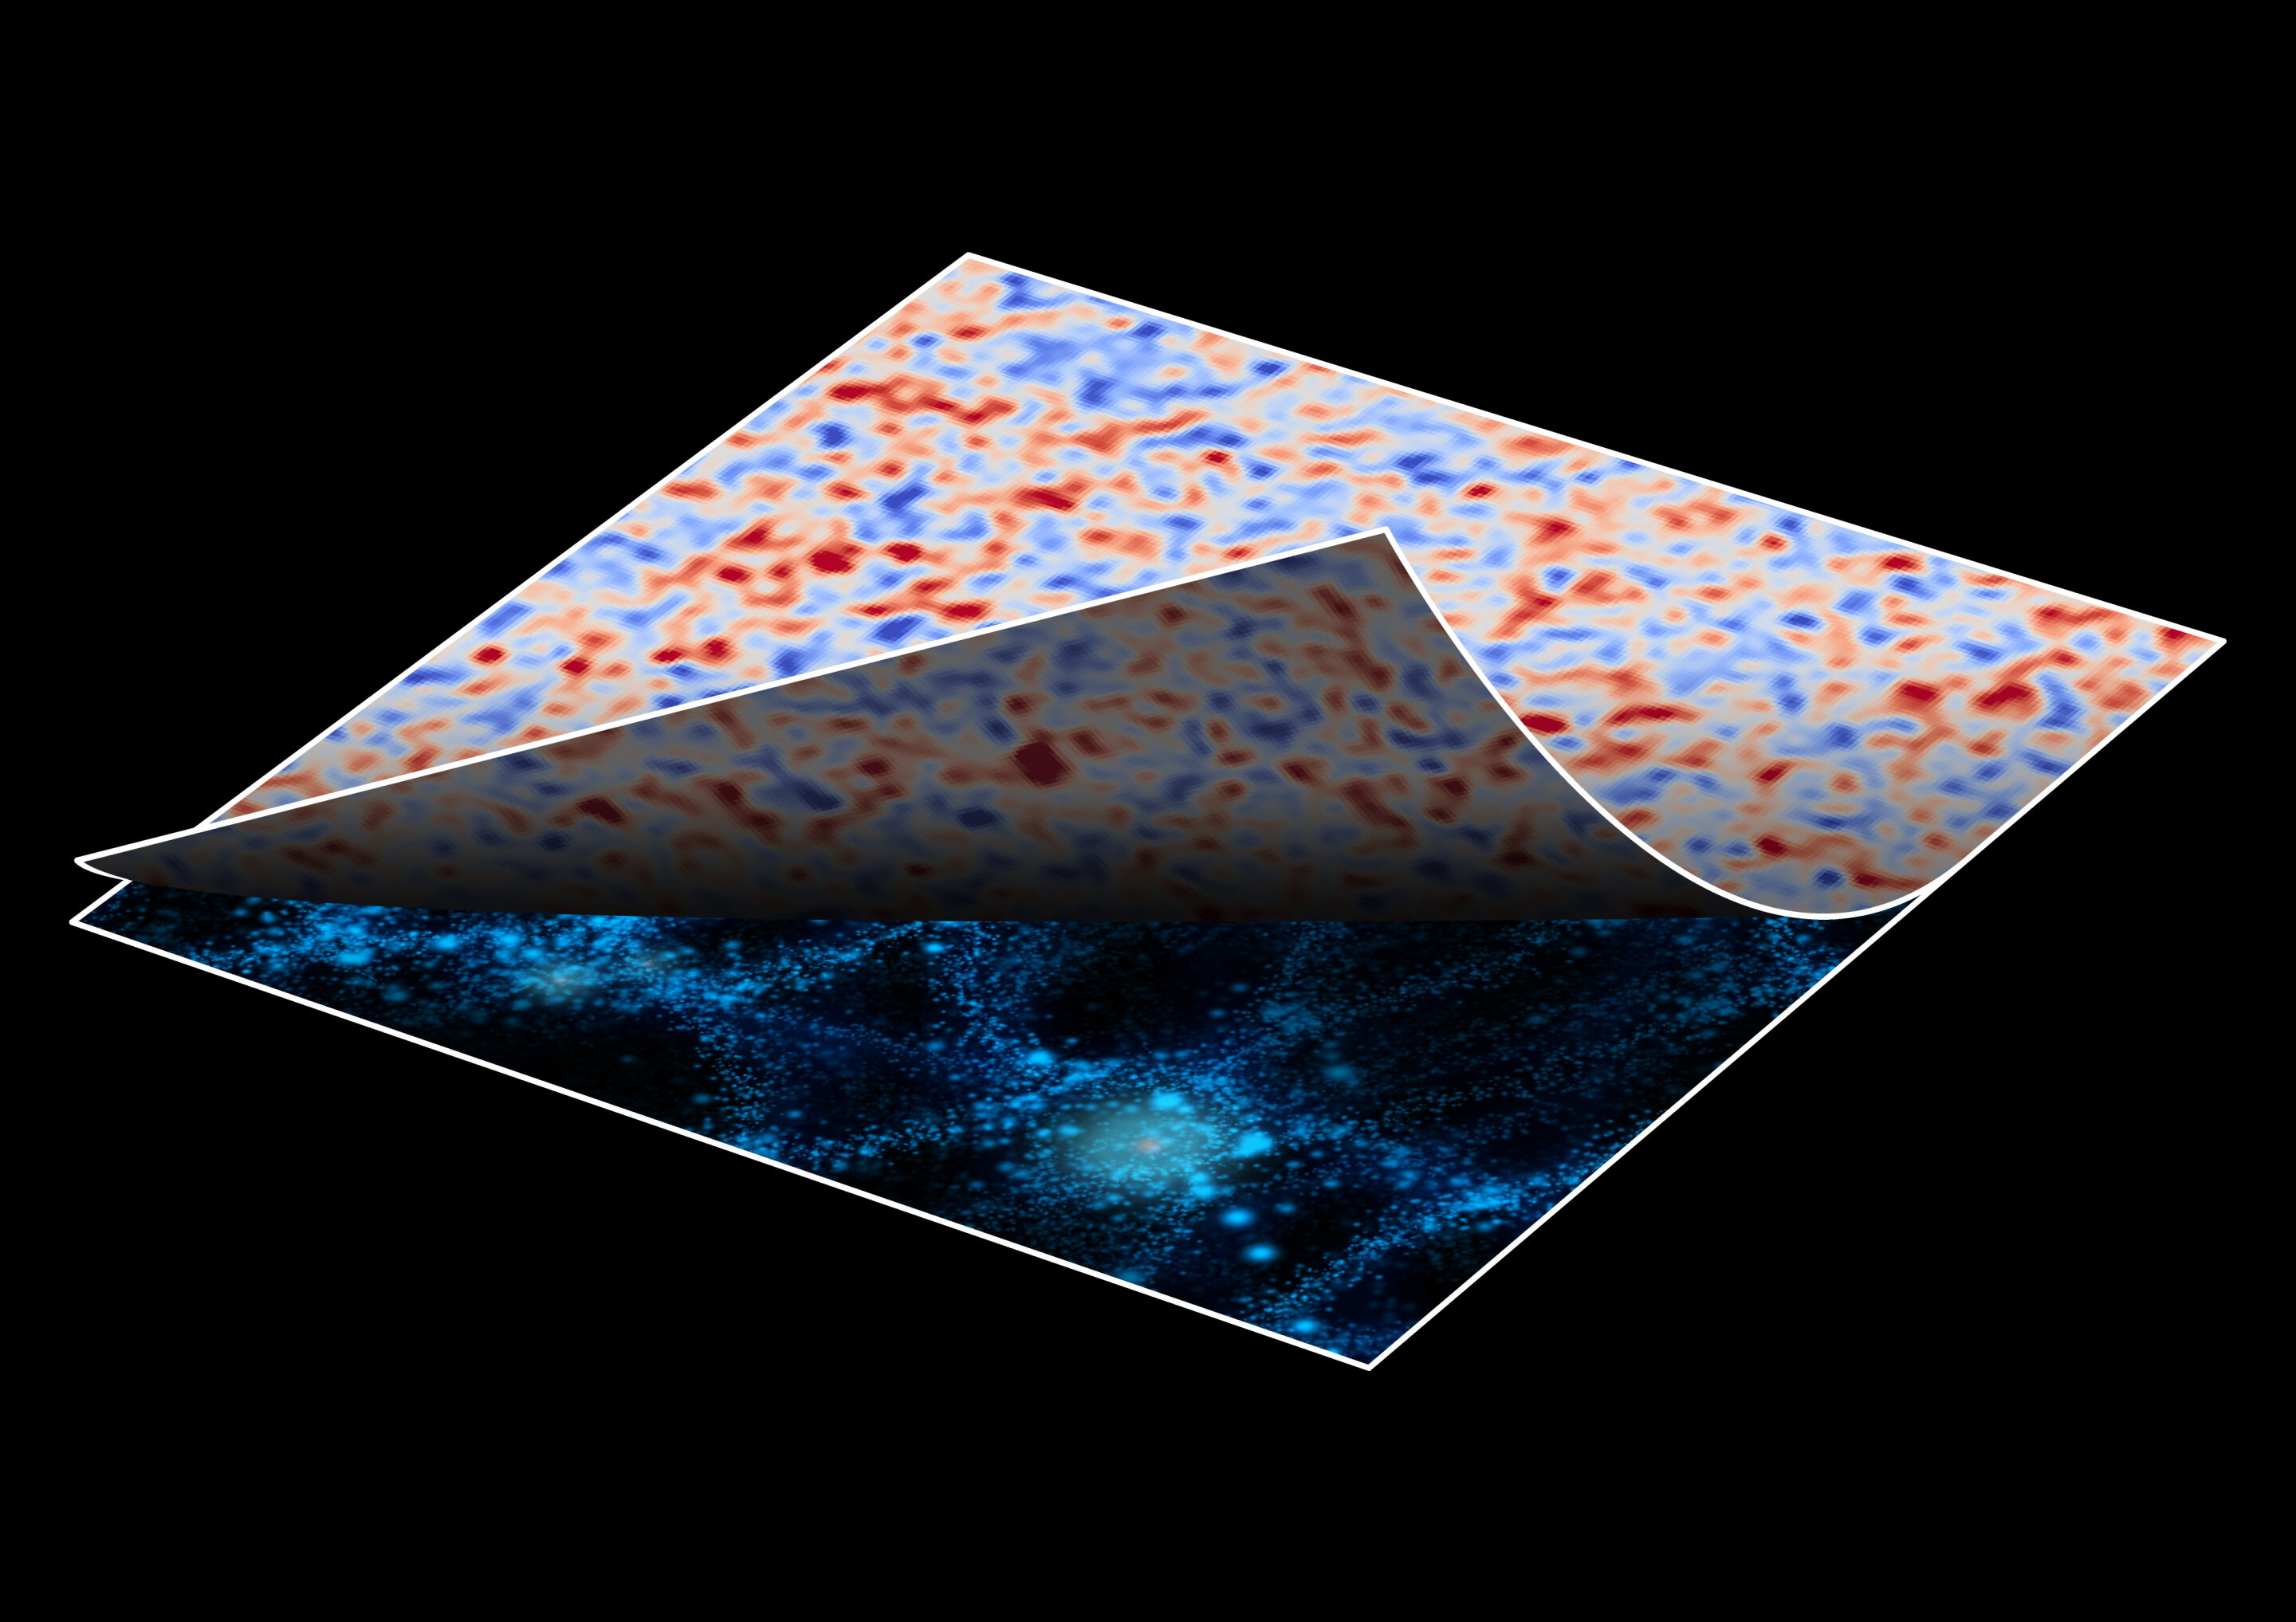 Observation, simulation, and AI join forces to reveal a clear universe